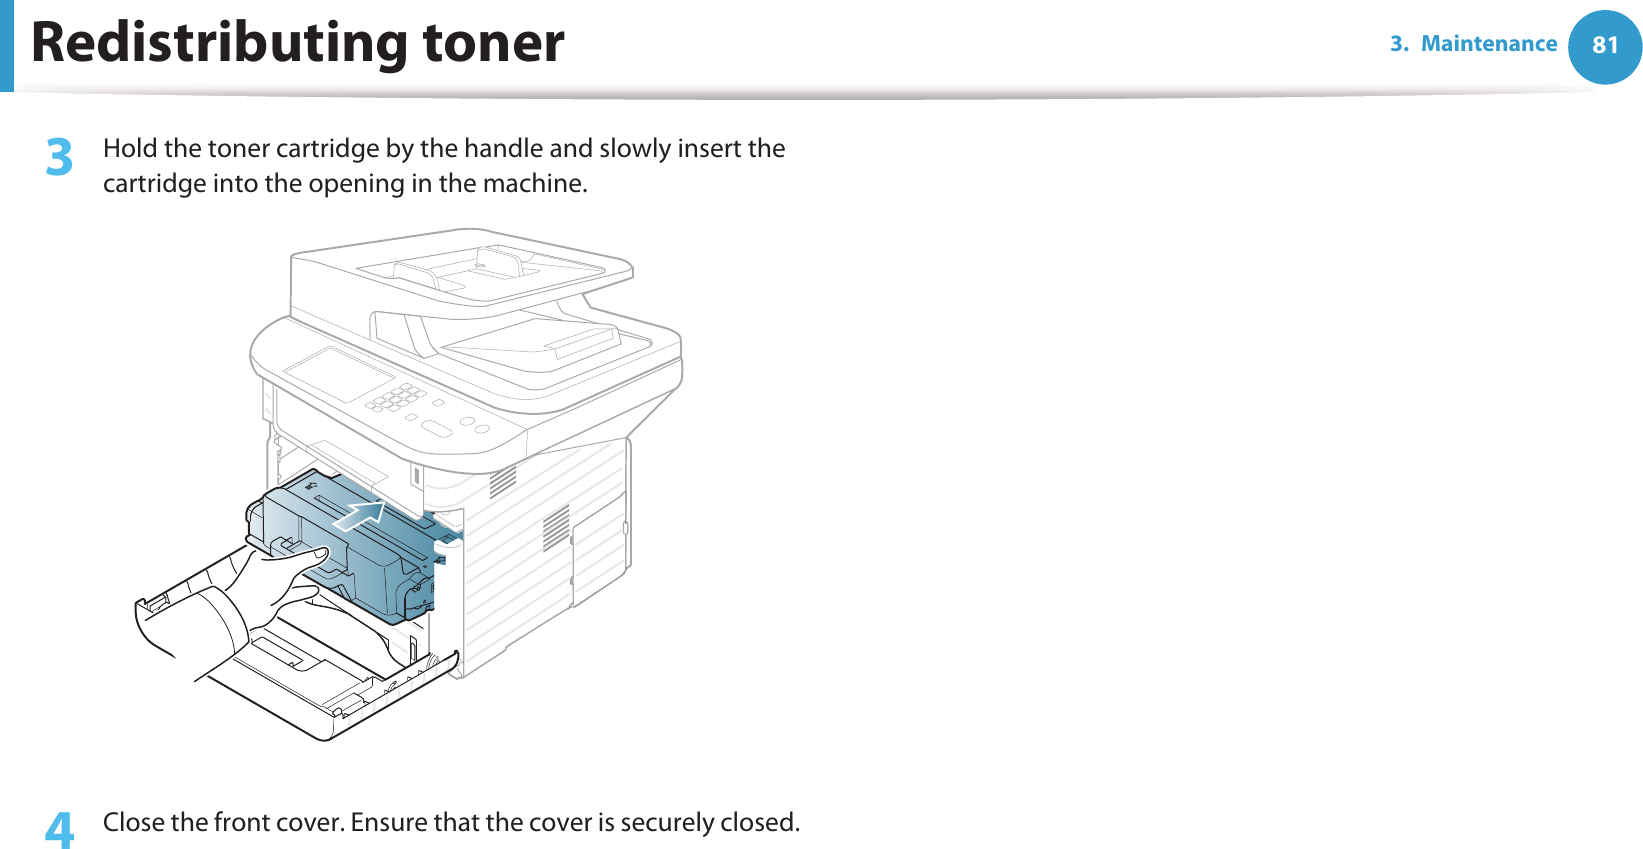 Redistributing toner 813. Maintenance3  Hold the toner cartridge by the handle and slowly insert the cartridge into the opening in the machine. 4  Close the front cover. Ensure that the cover is securely closed. 